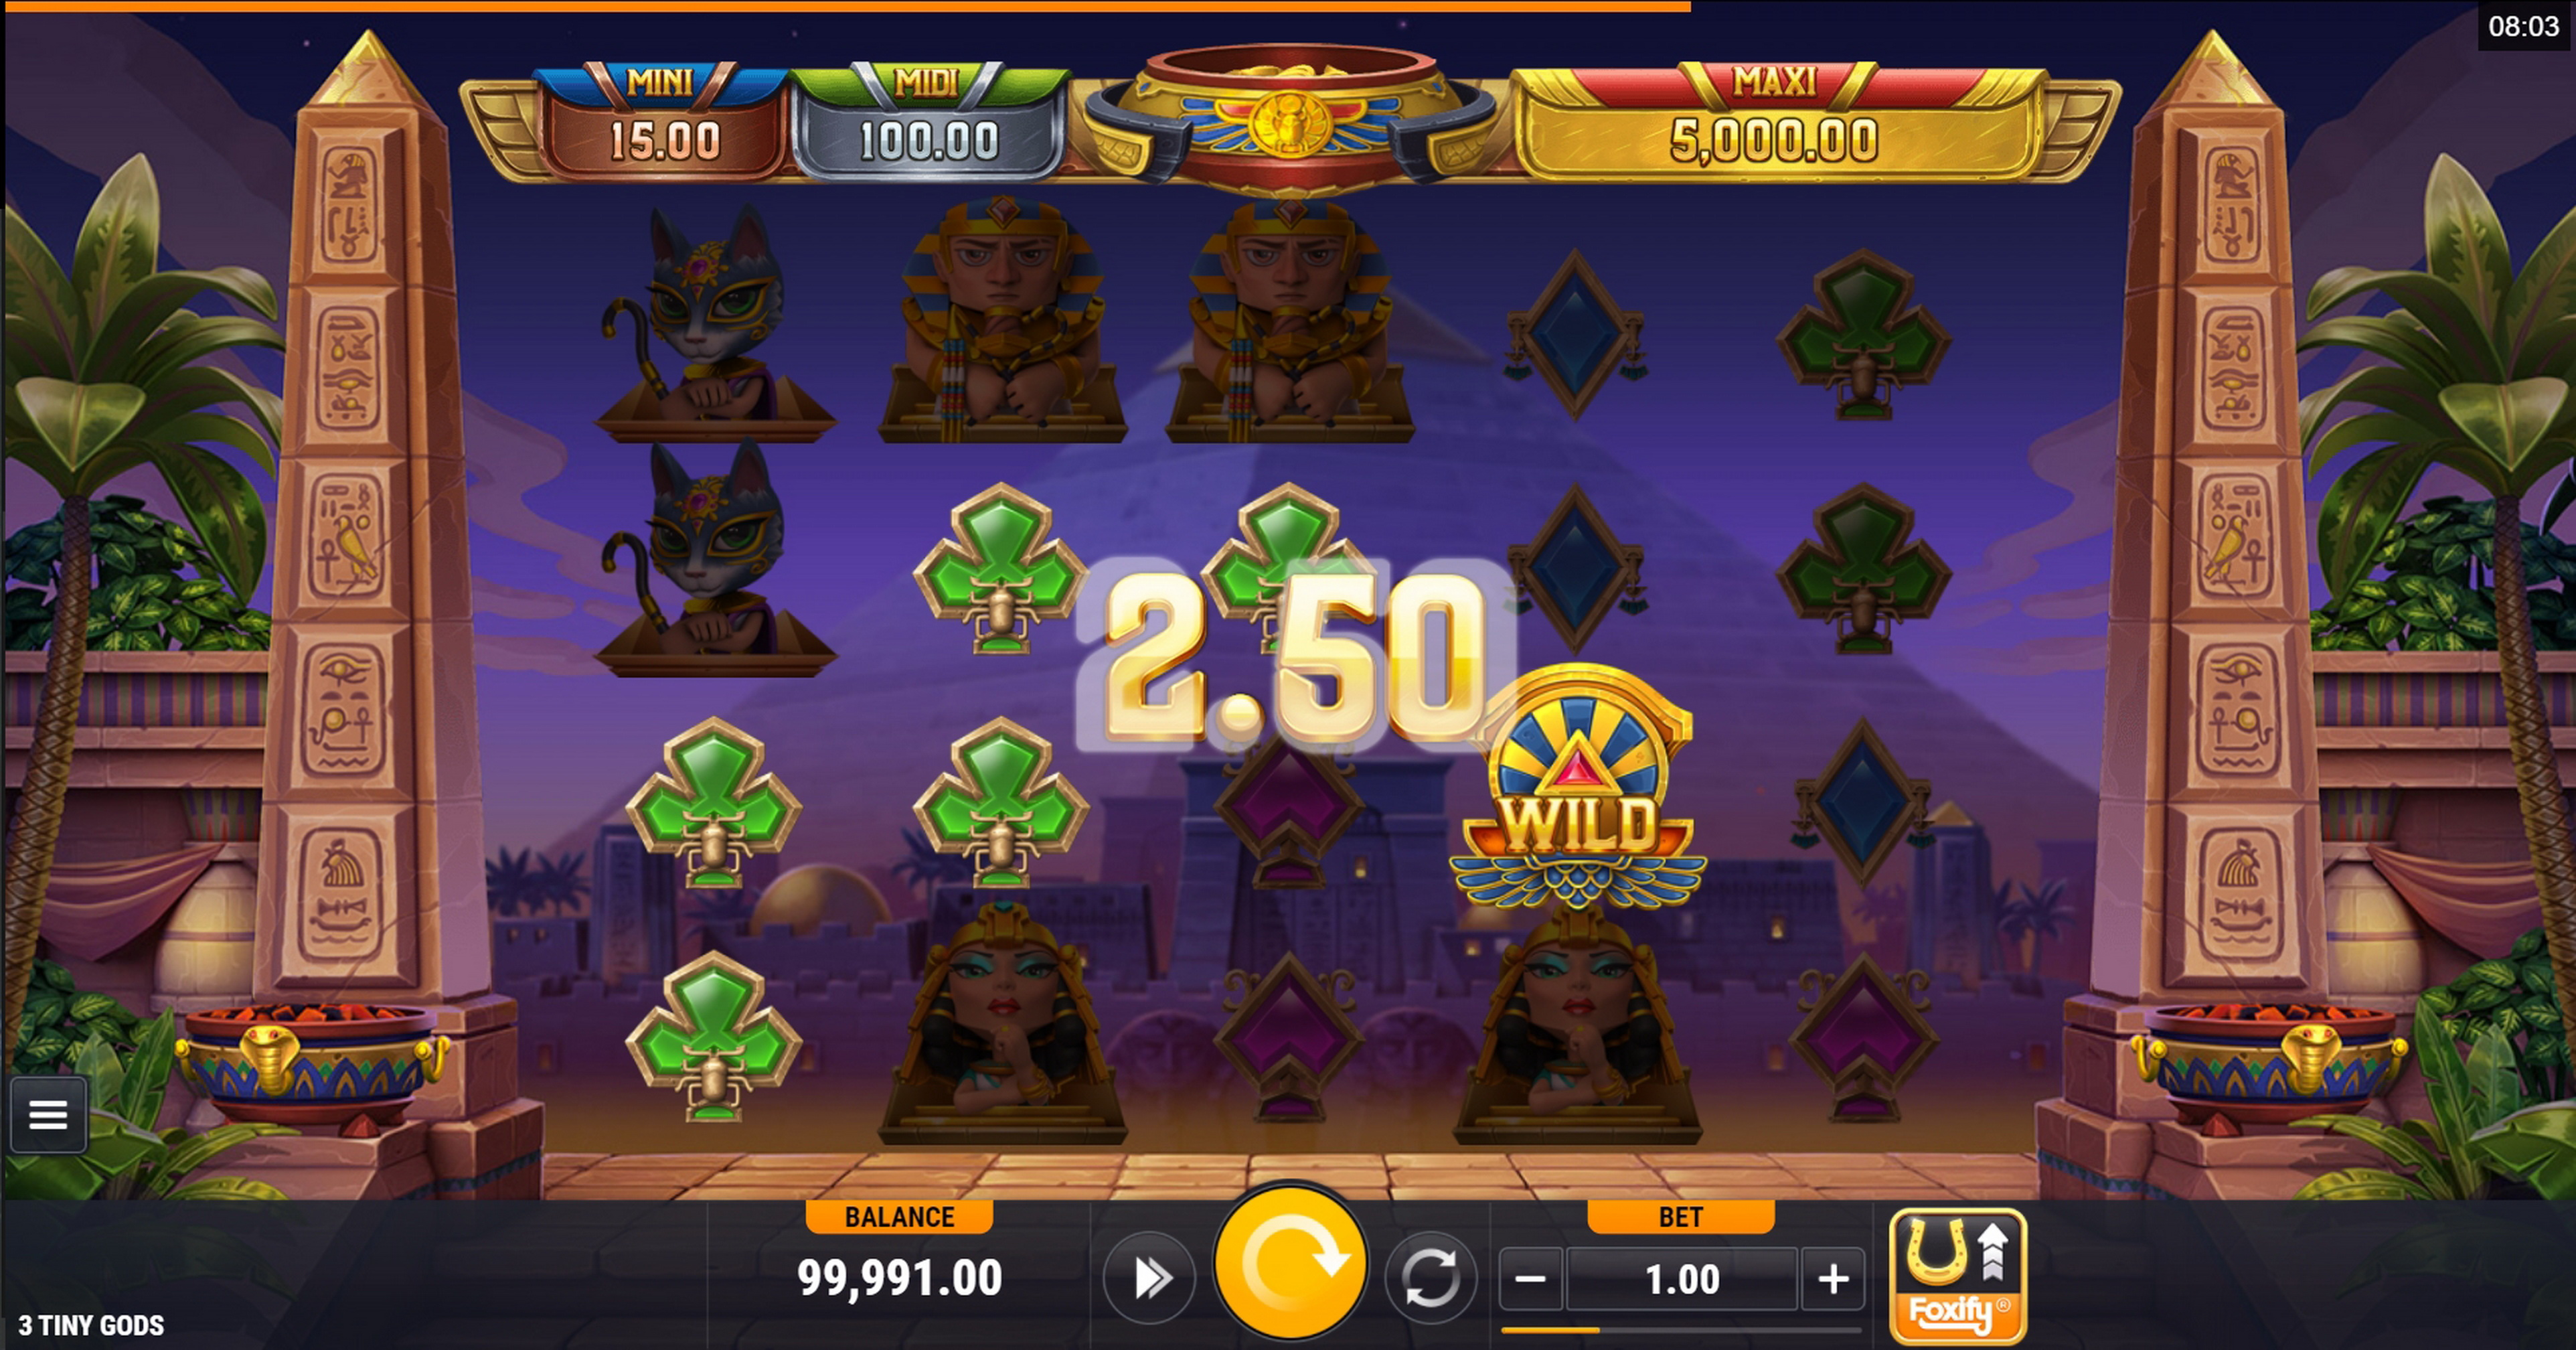 Win Money in 3 Tiny Gods Free Slot Game by Foxium